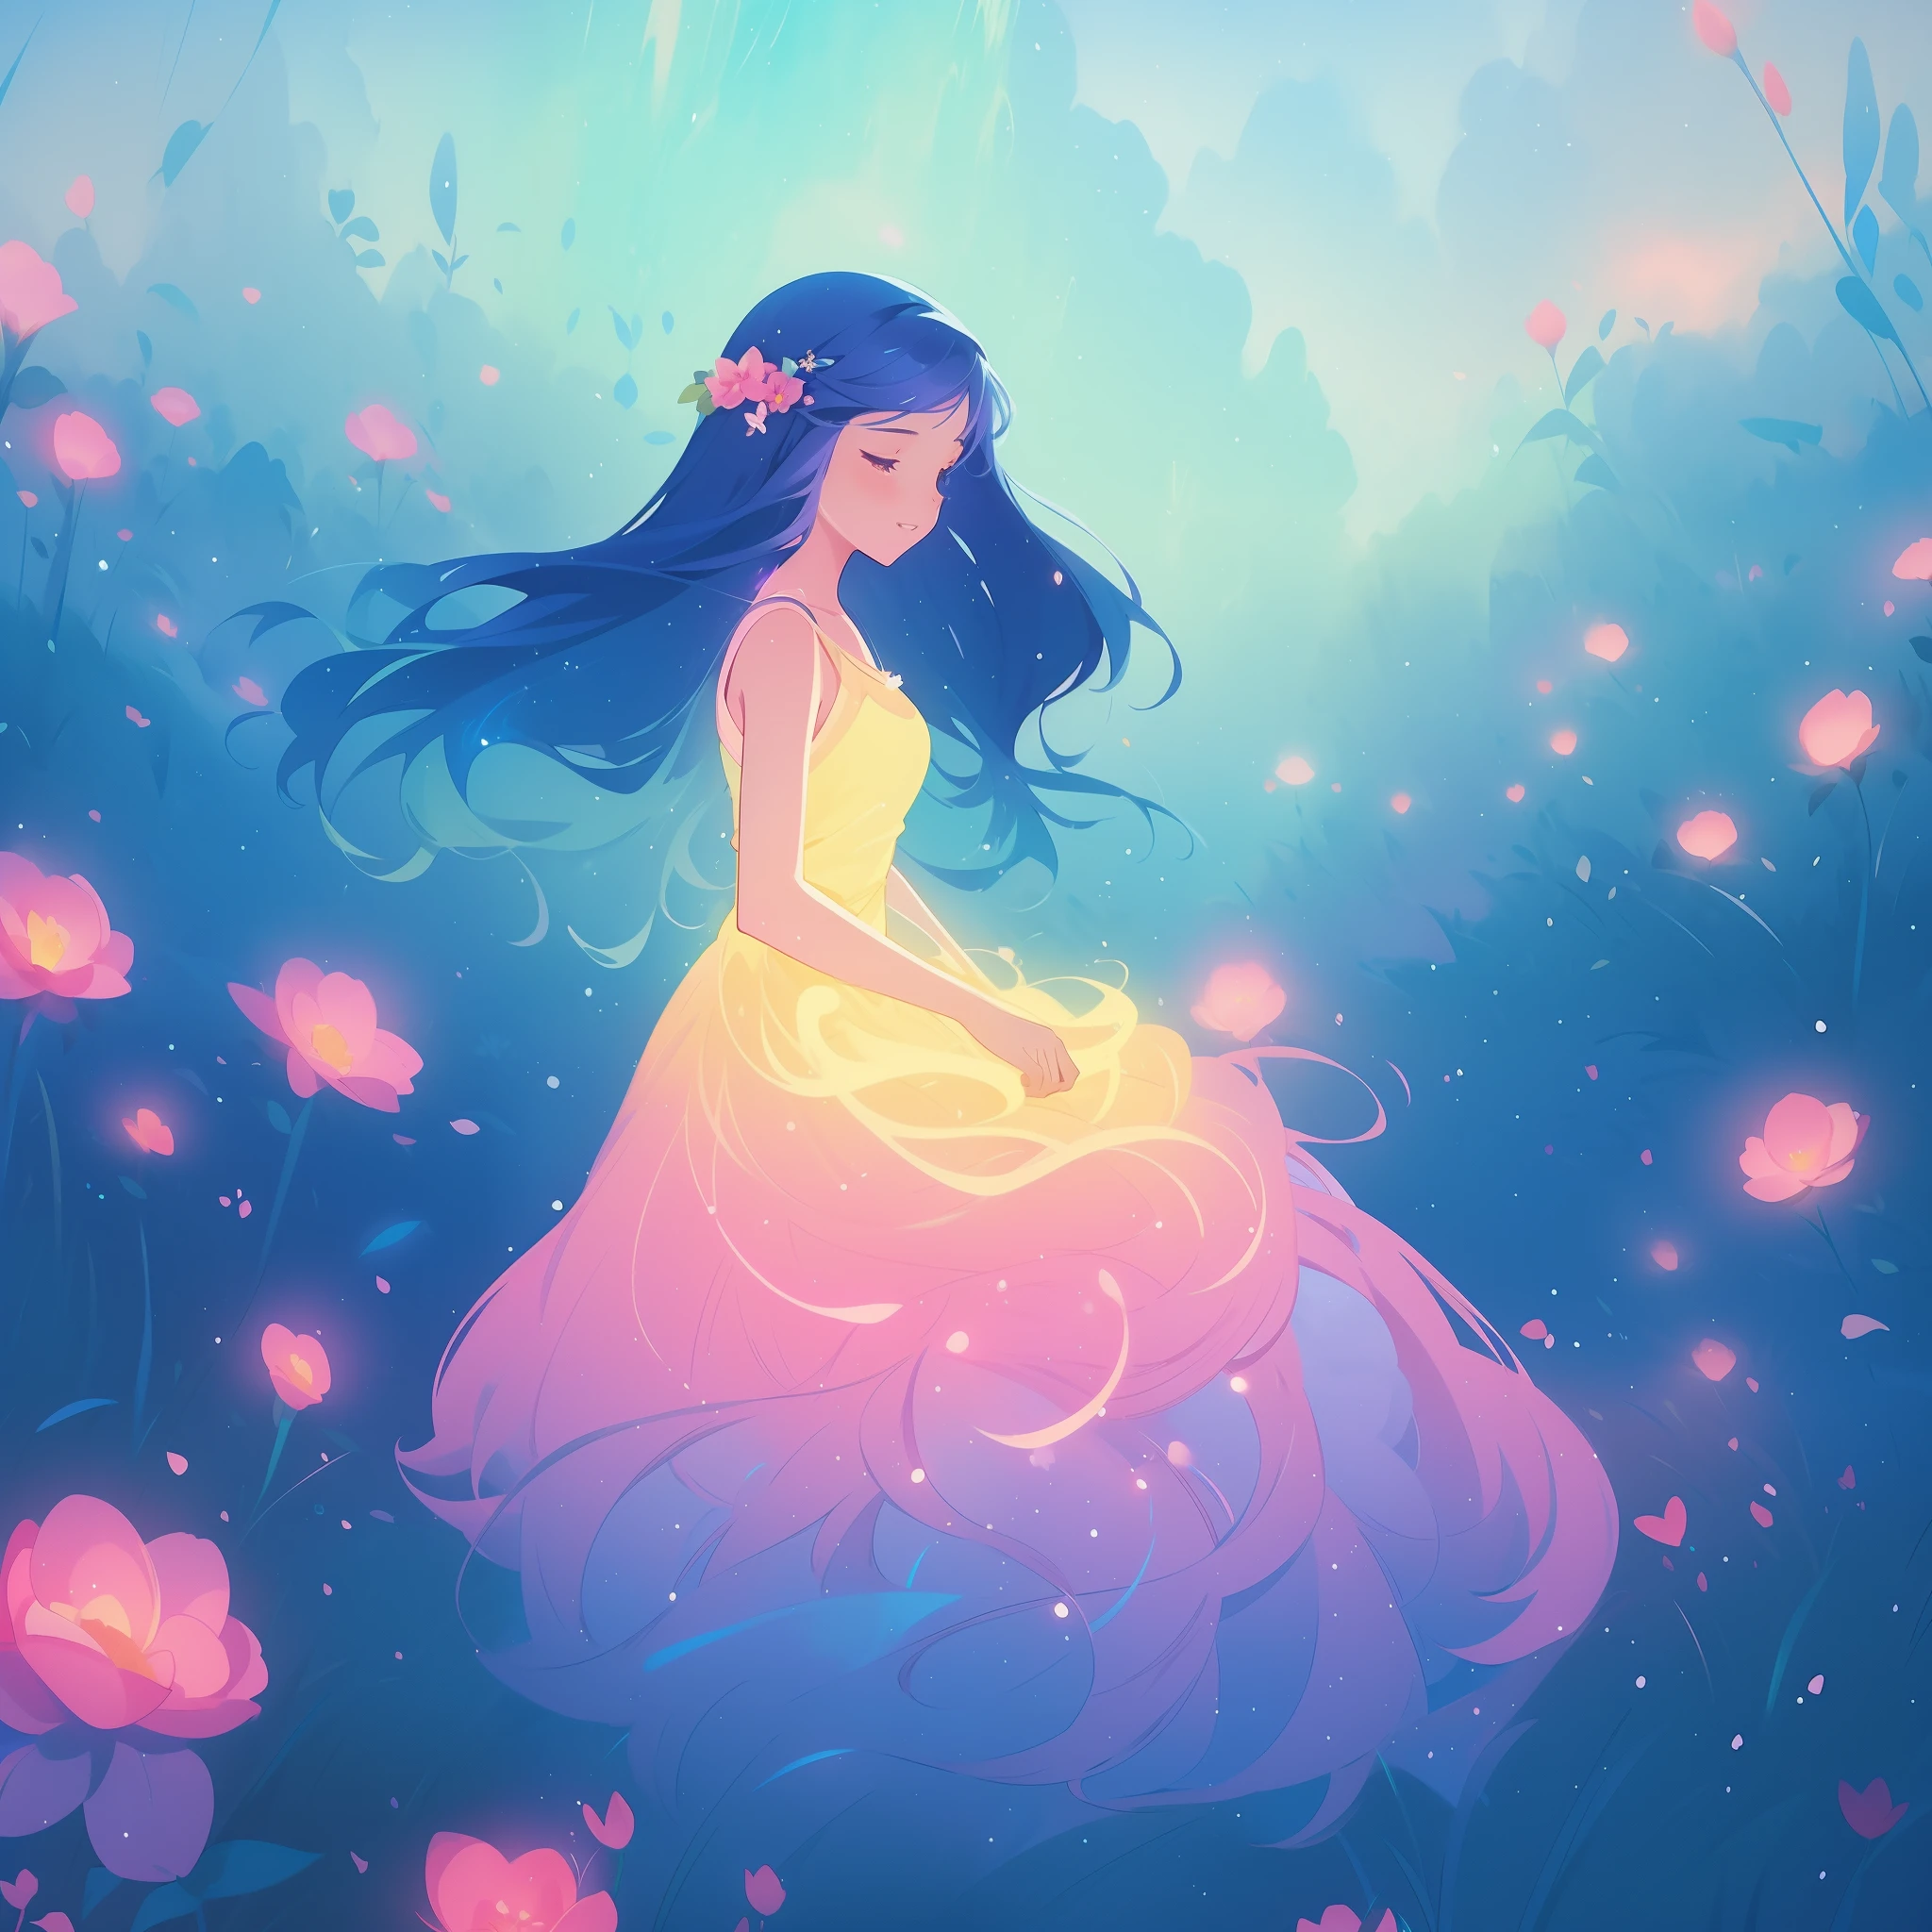 beautiful girl in gradient colorful dress, yellow pink purple fairy dress, beautiful girl sitting in a field with pink red flowers, puffy pink flowers, glowing lights, whimsical landscape, long dark blue flowing hair, watercolor illustration, inspired by Glen Keane, inspired by Lois van Baarle, disney art style, by Lois van Baarle, glowing aura around her, by Glen Keane, jen bartel, glowing lights! digital painting, flowing glowing hair, glowing flowing hair, beautiful digital illustration, fantasia otherworldly landscape plants flowers, beautiful, masterpiece, best quality, anime disney style